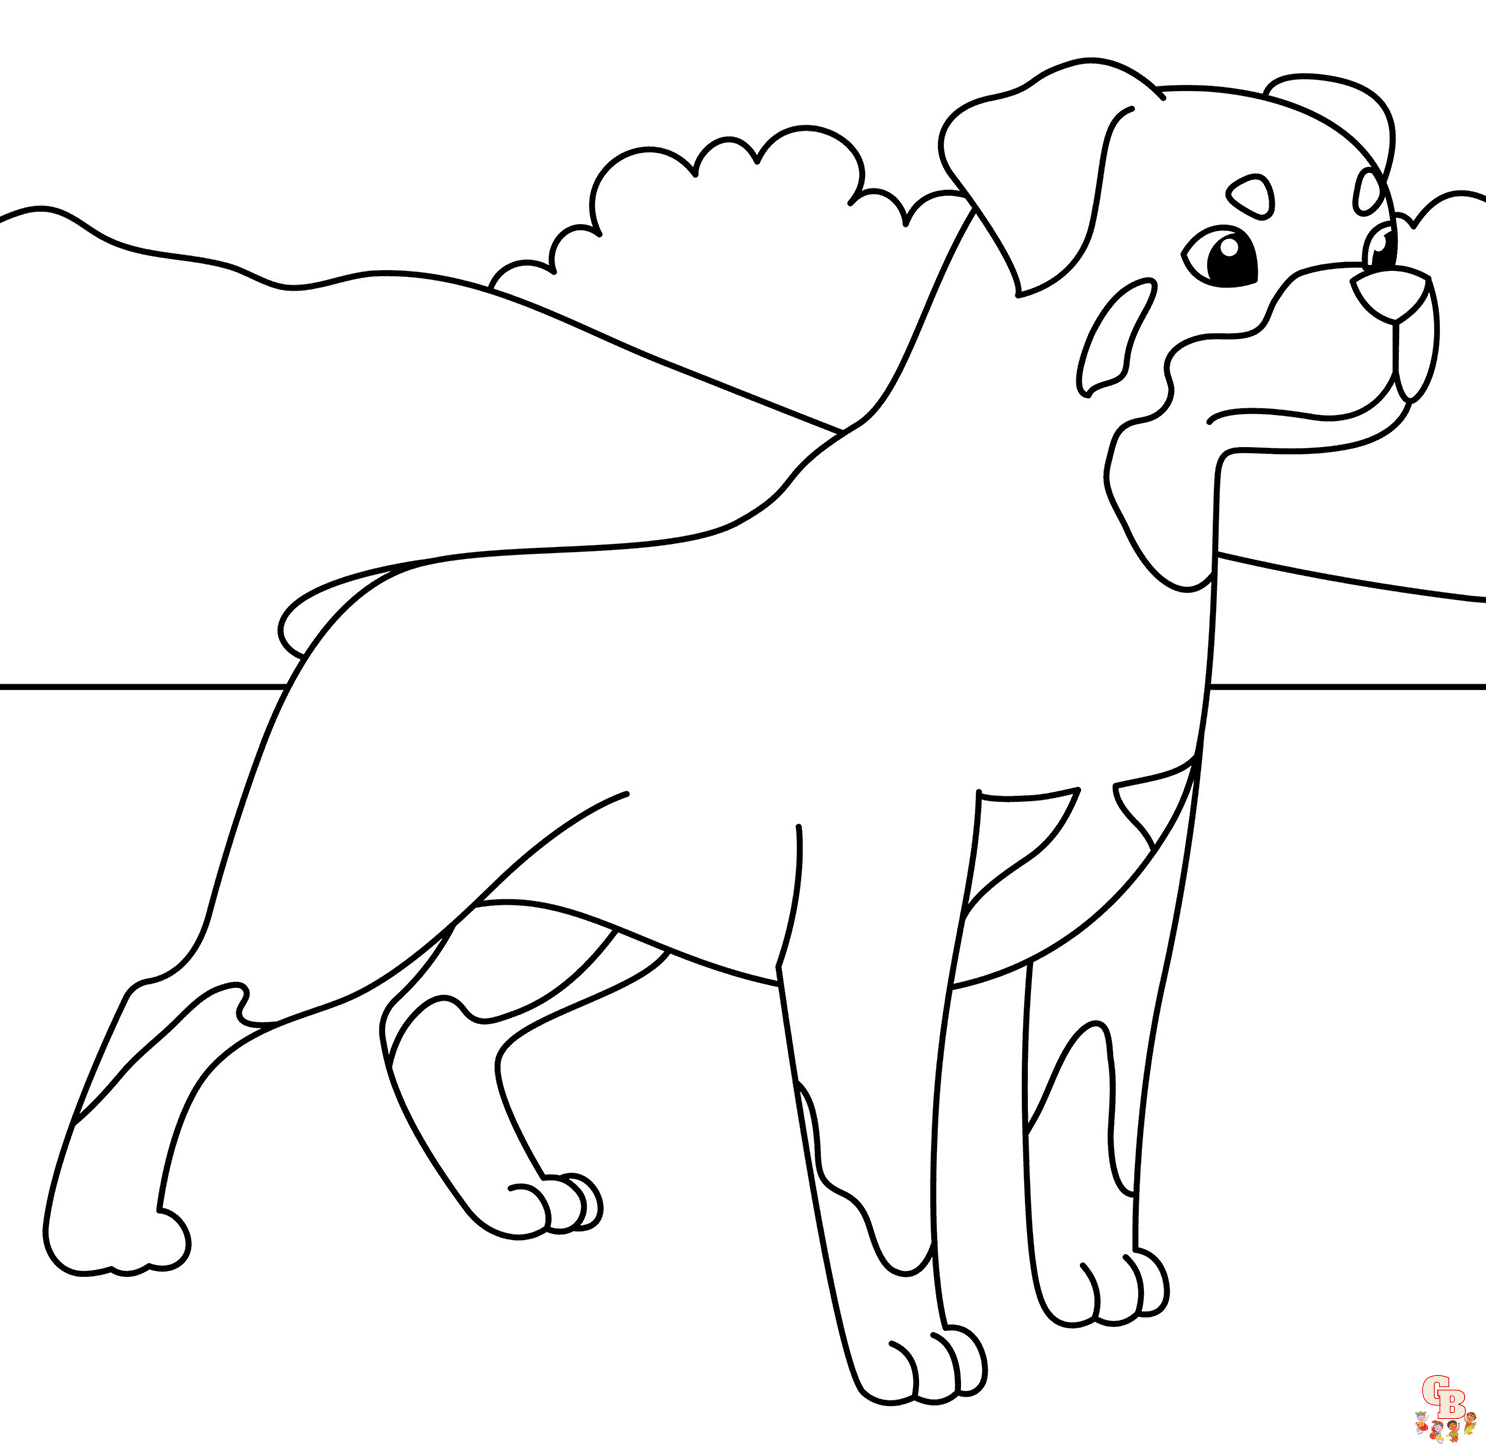 Rottweiler coloring pages printable free